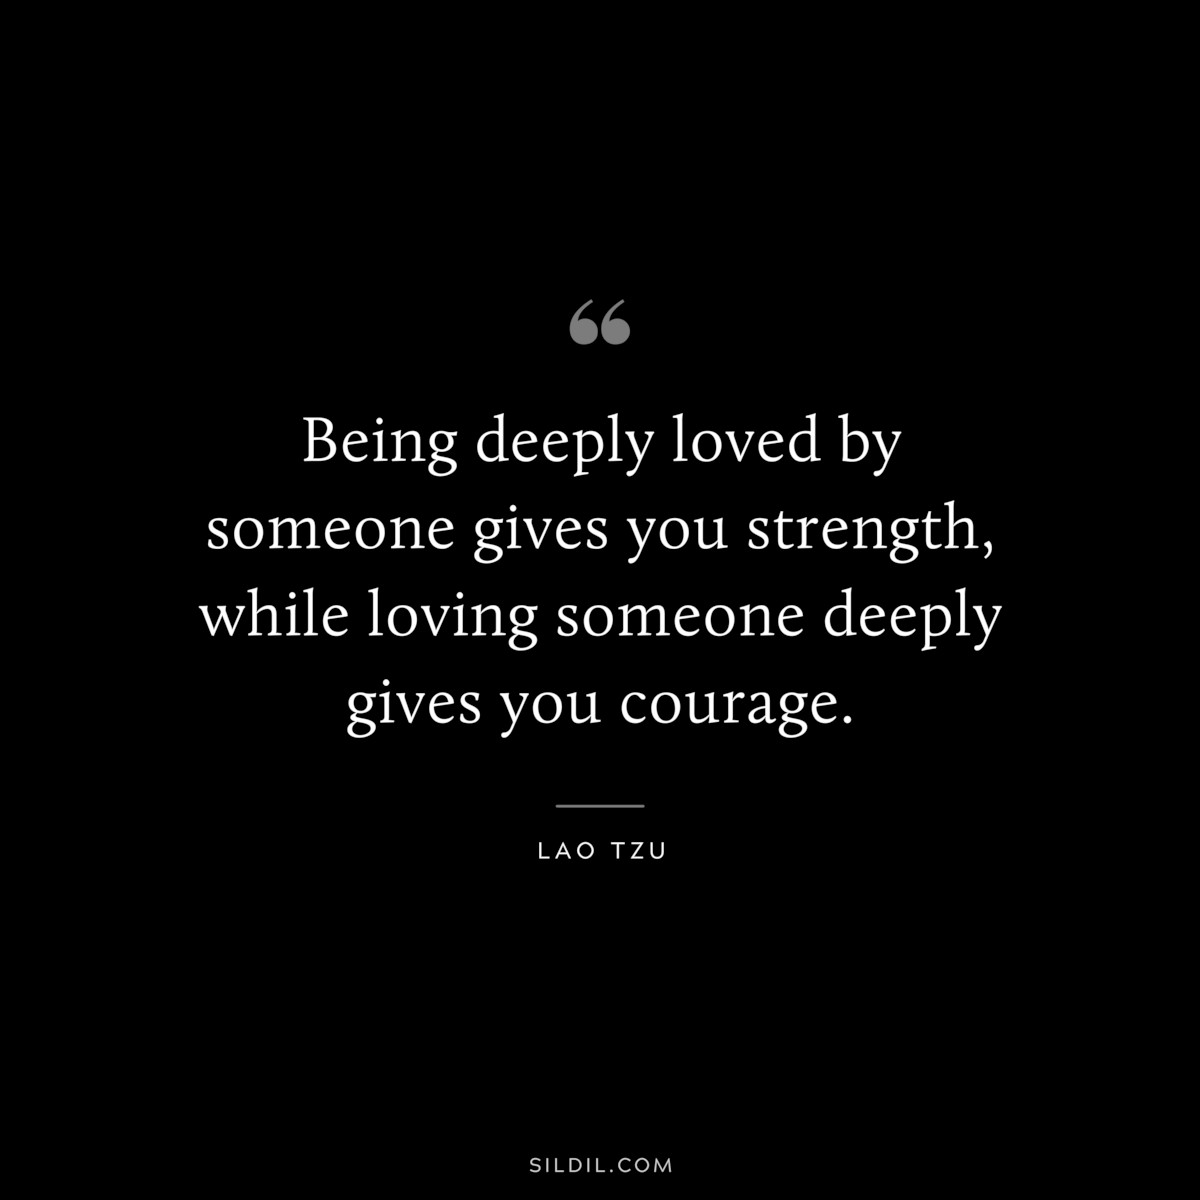 Being deeply loved by someone gives you strength, while loving someone deeply gives you courage. ― Lao Tzu